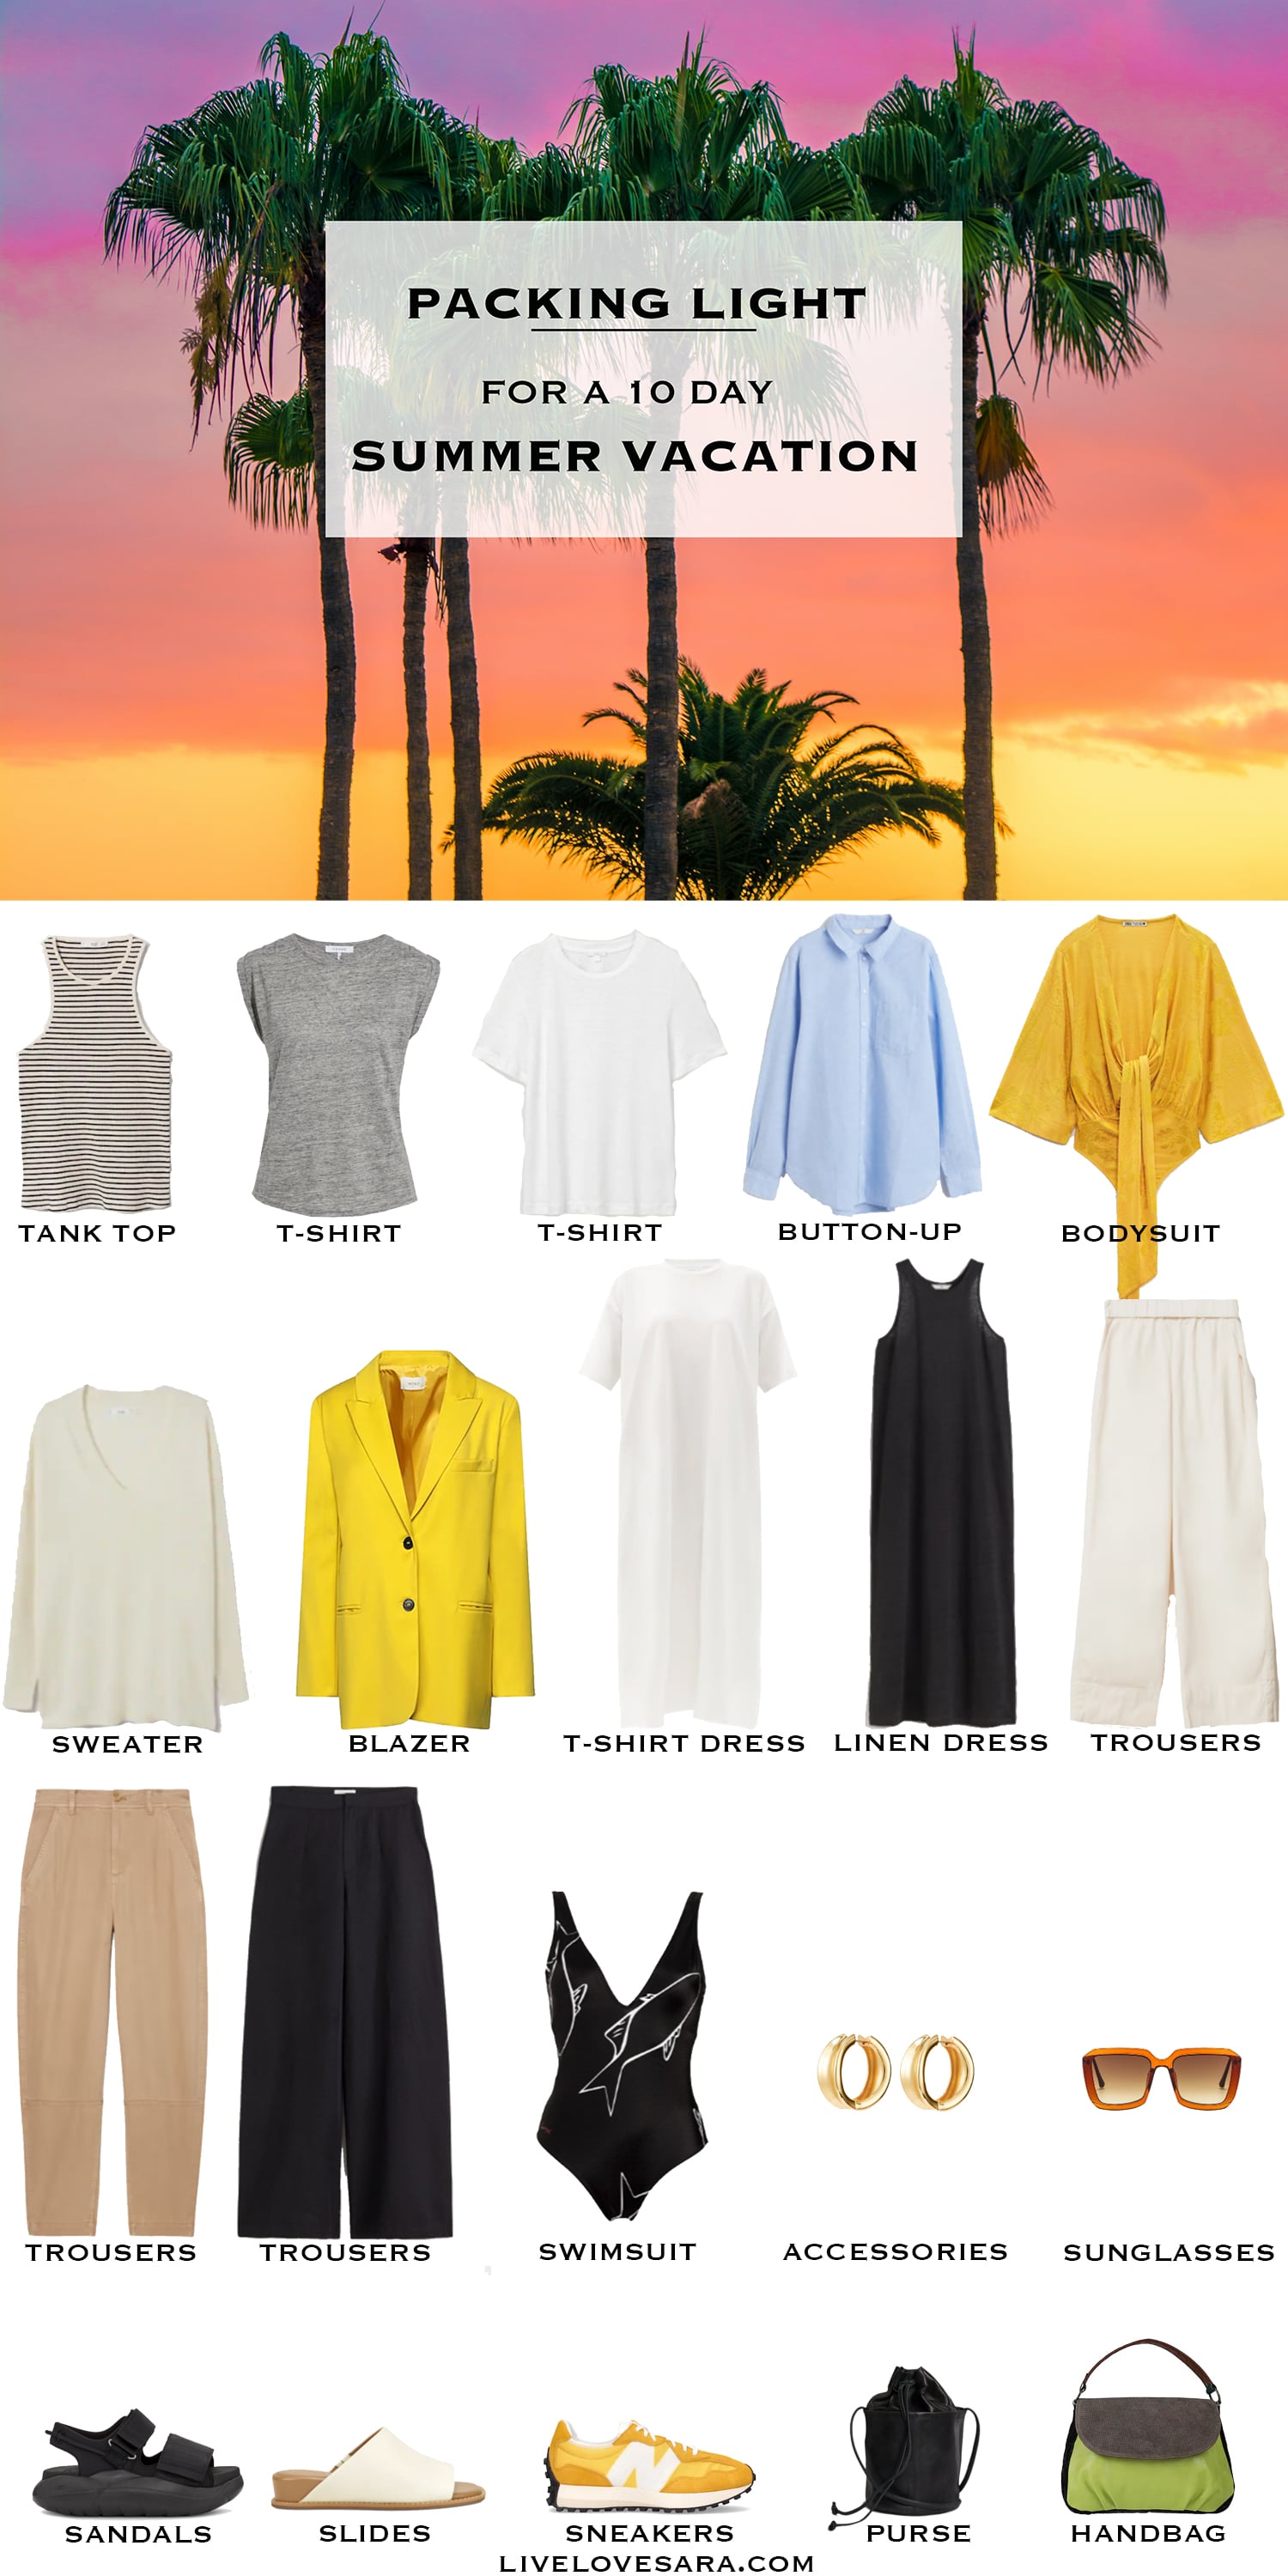 A white background with the image of a sunset and palm trees at the top. Below that is a list of 20 items to pack for a summer vacation. 